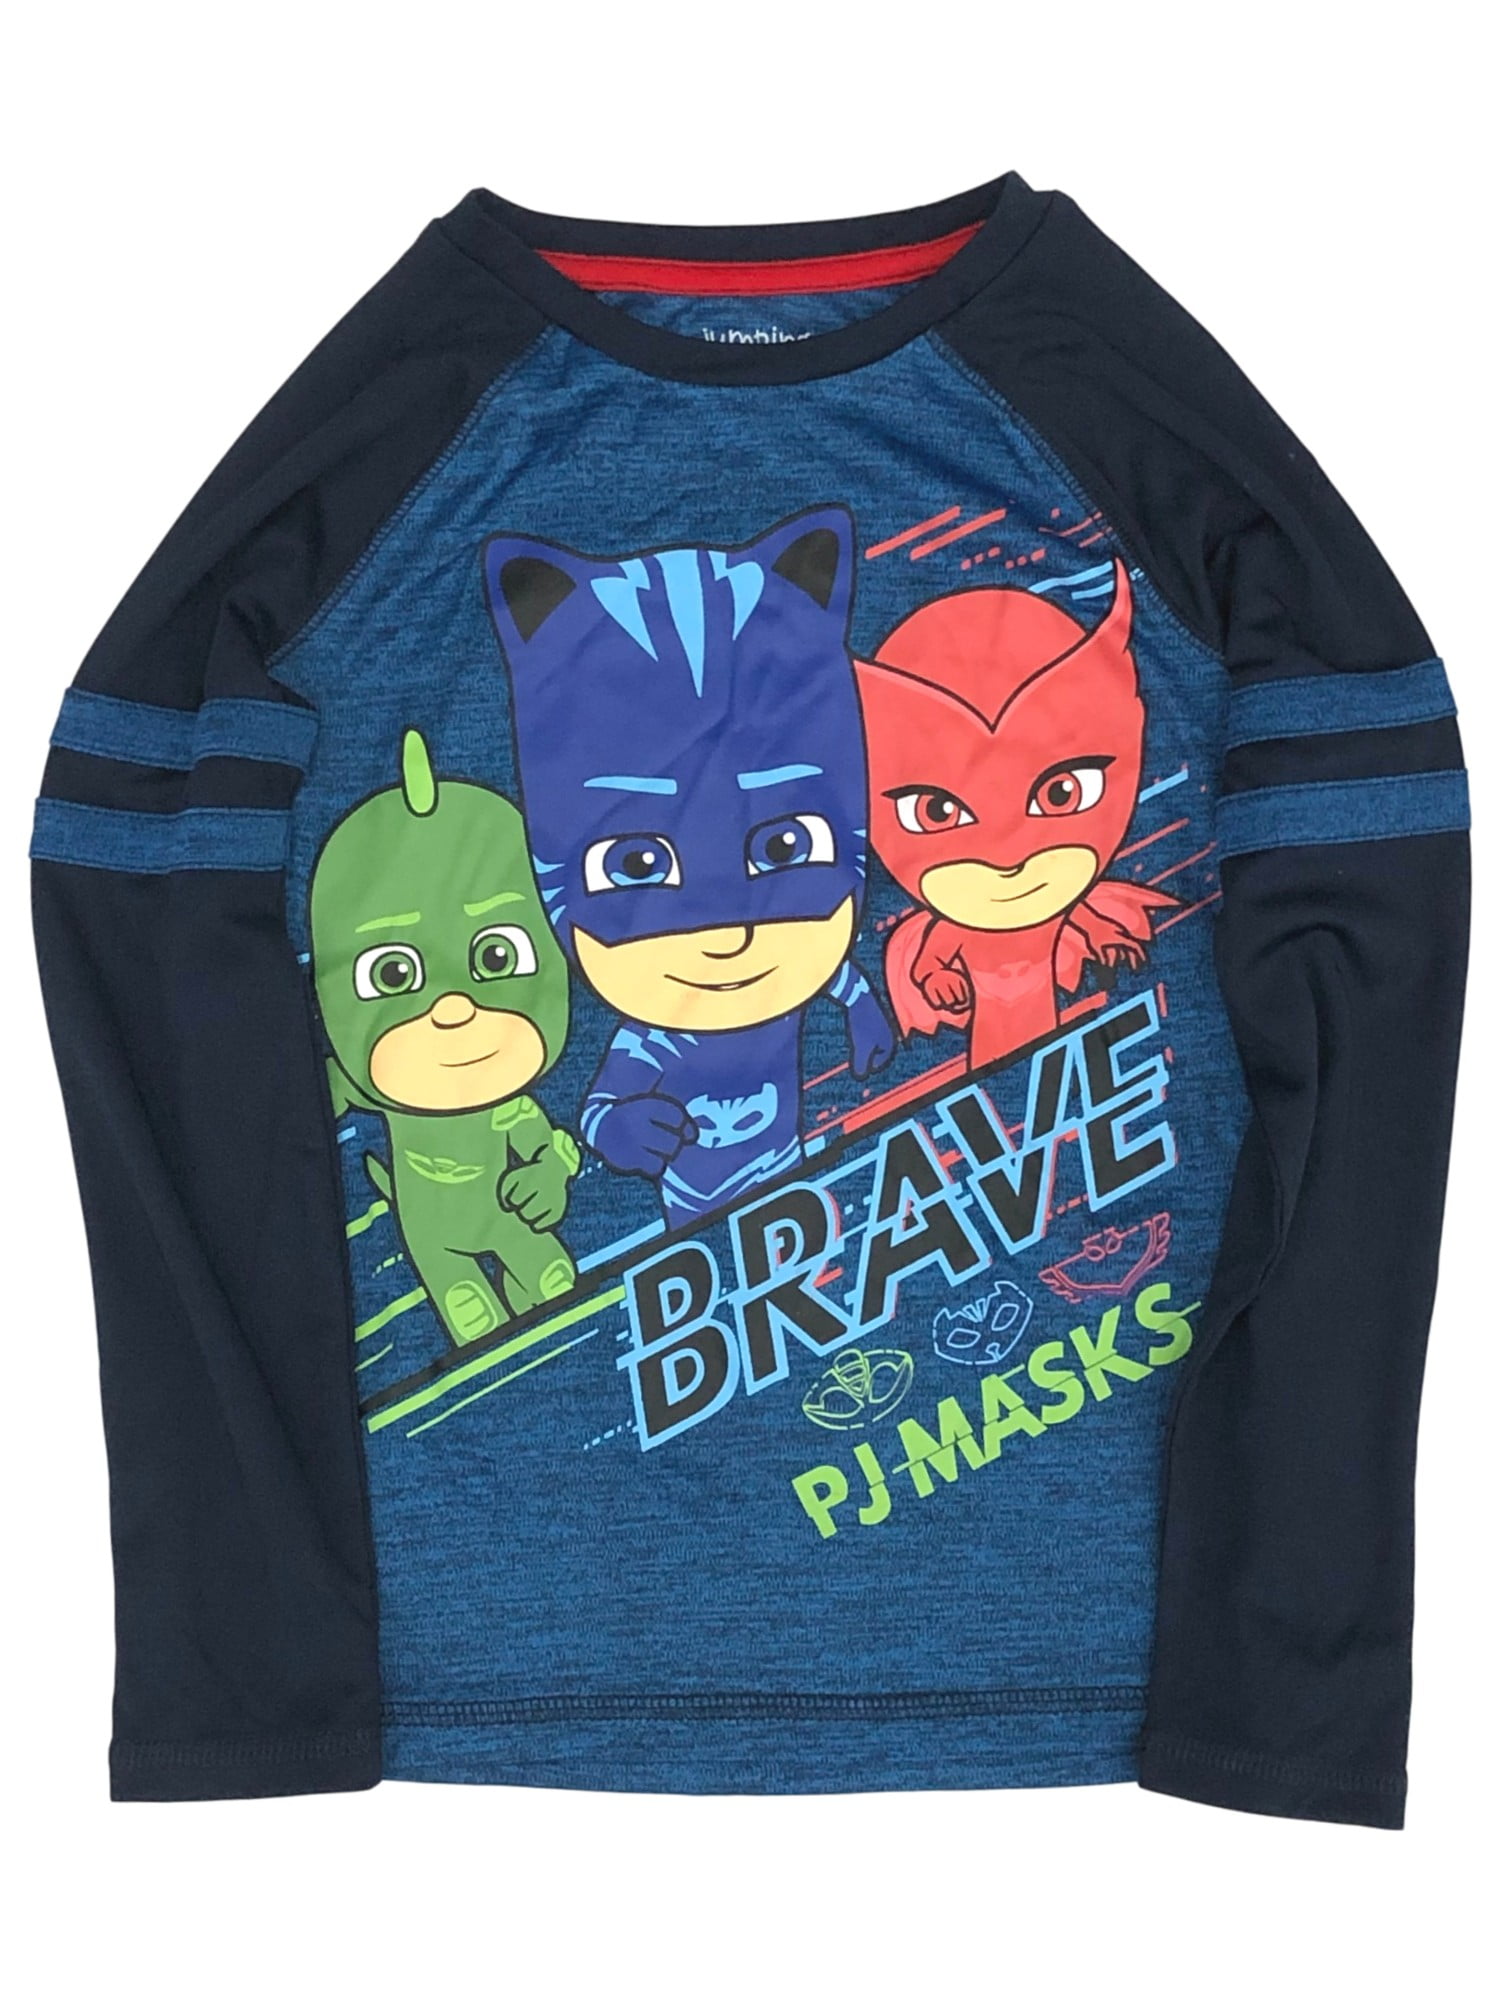 Details about   PJ Masks Boys T-Shirt Blue Long Sleeve Officially Licensed Jumping Beans Catboy 